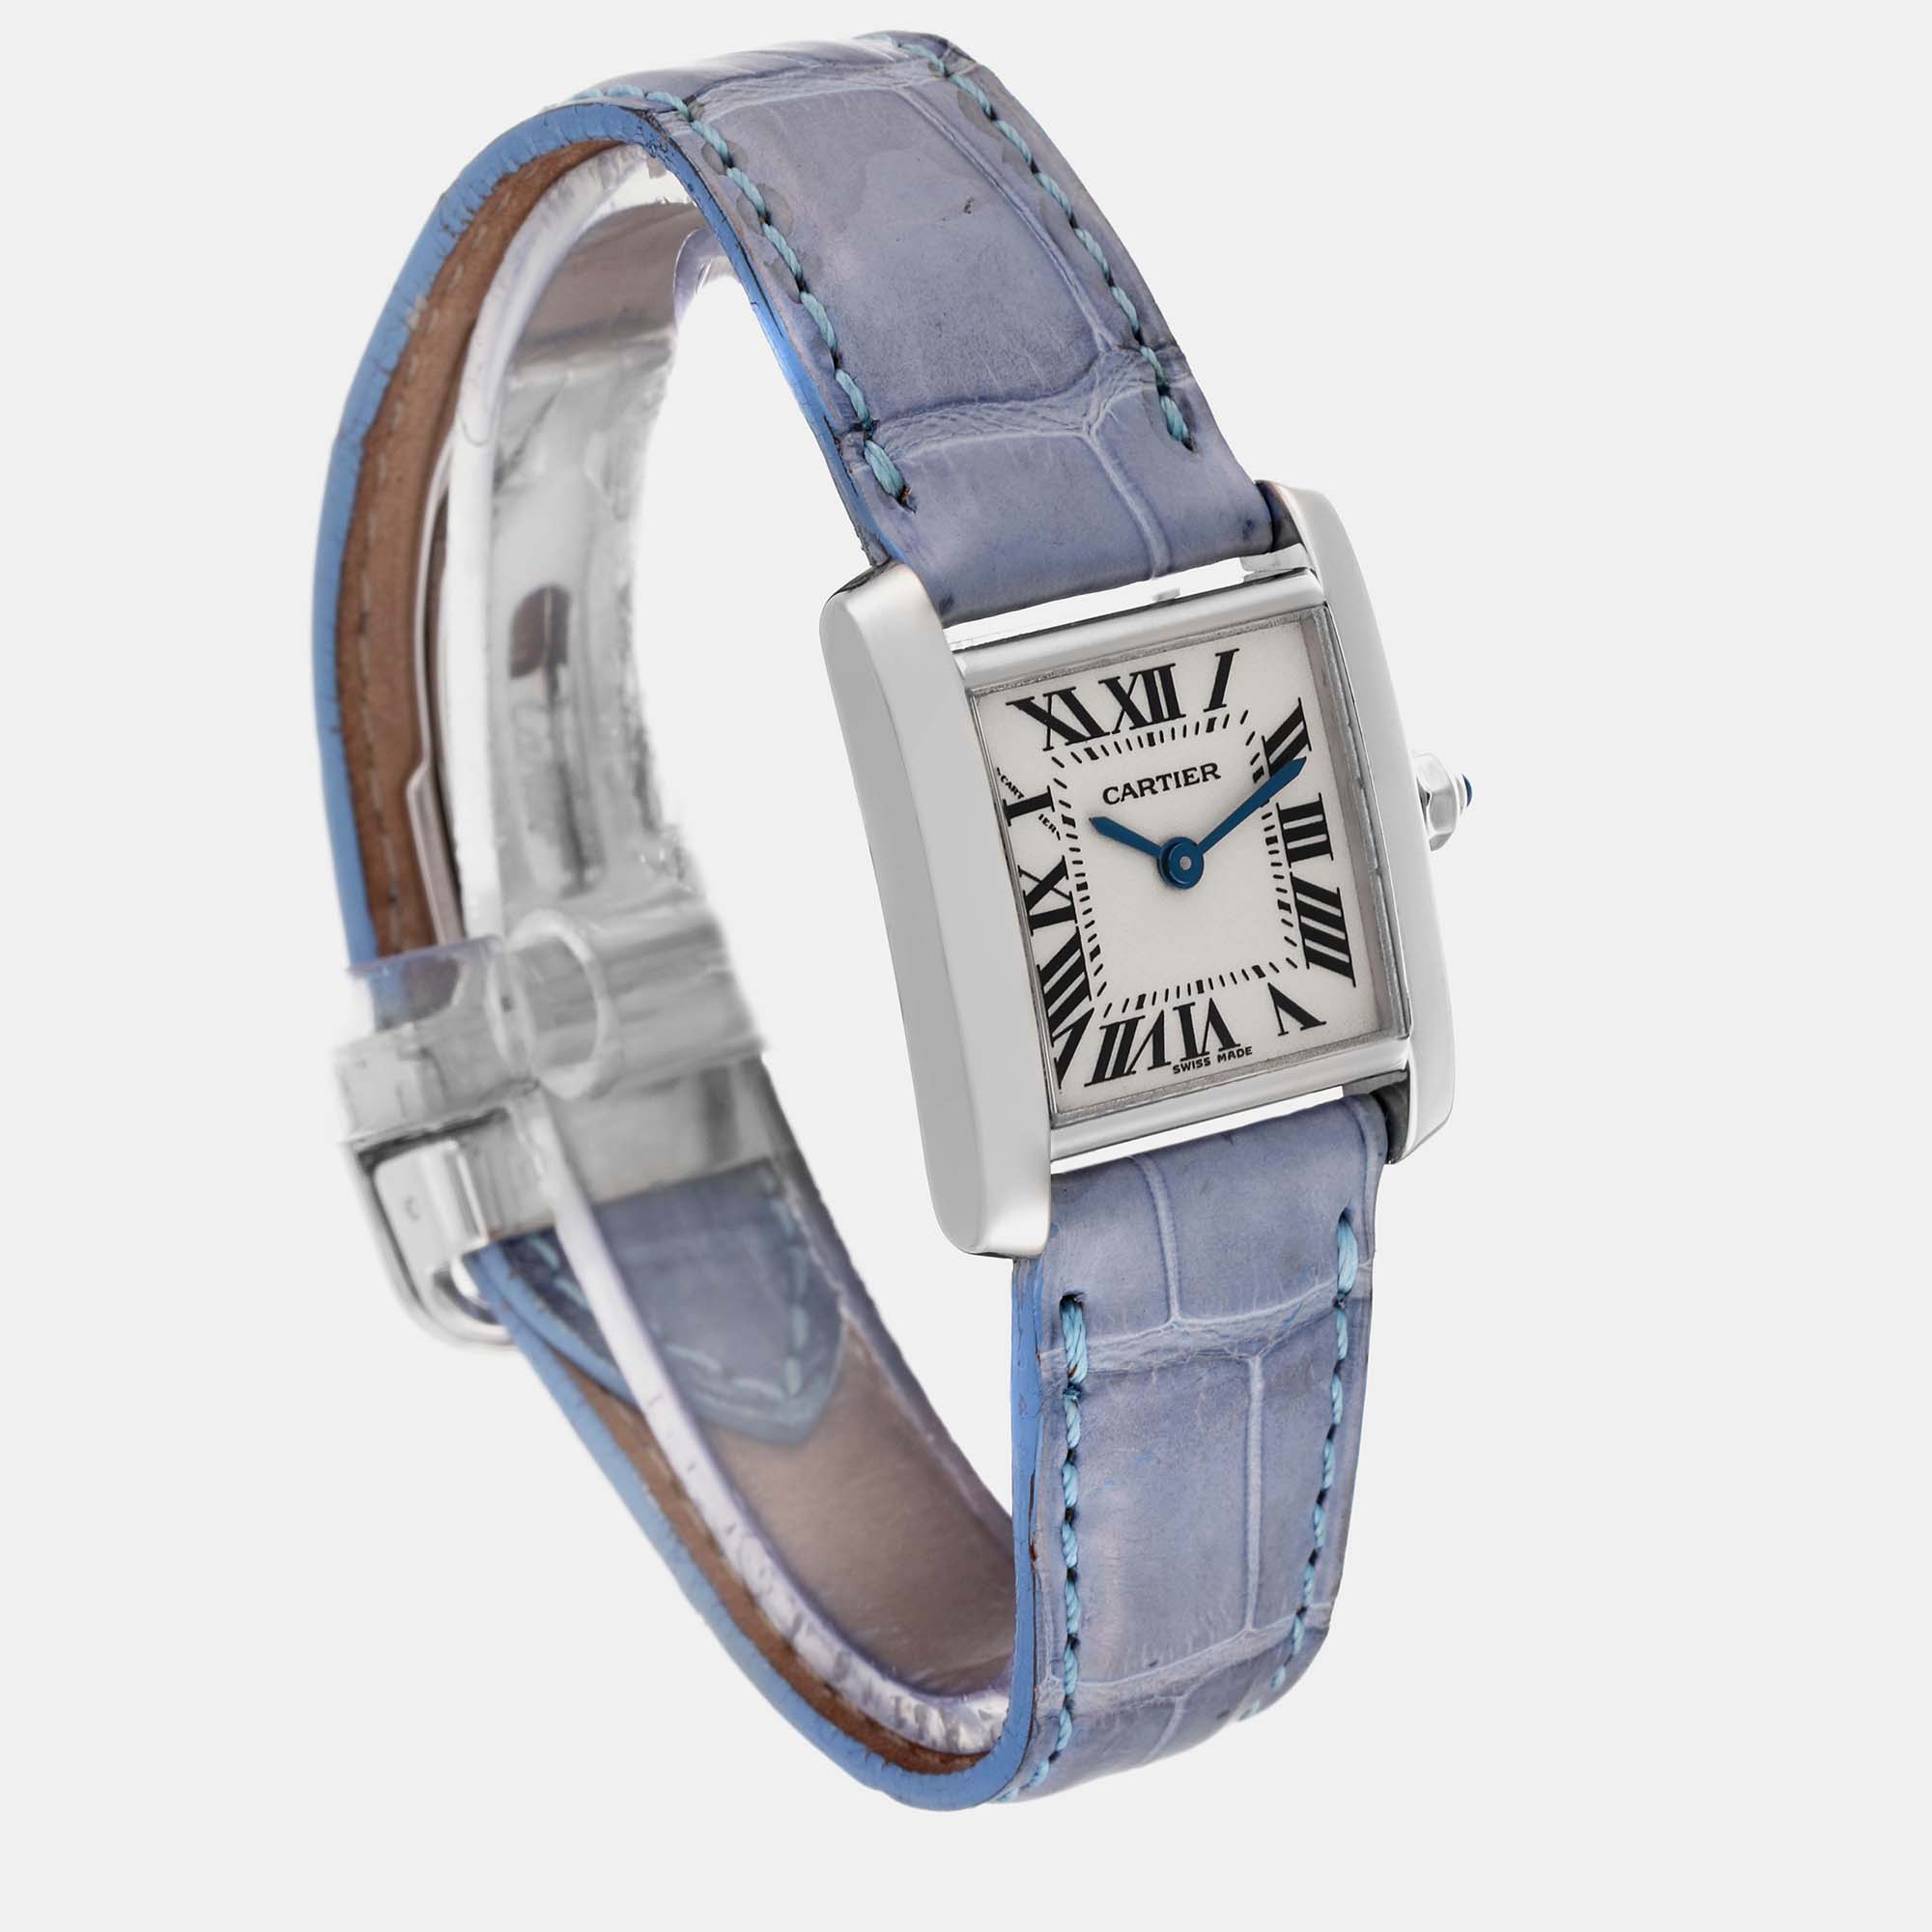 Cartier Tank Francaise White Gold Blue Strap Ladies Watch W5001256 20.0 X 25.0 Mm